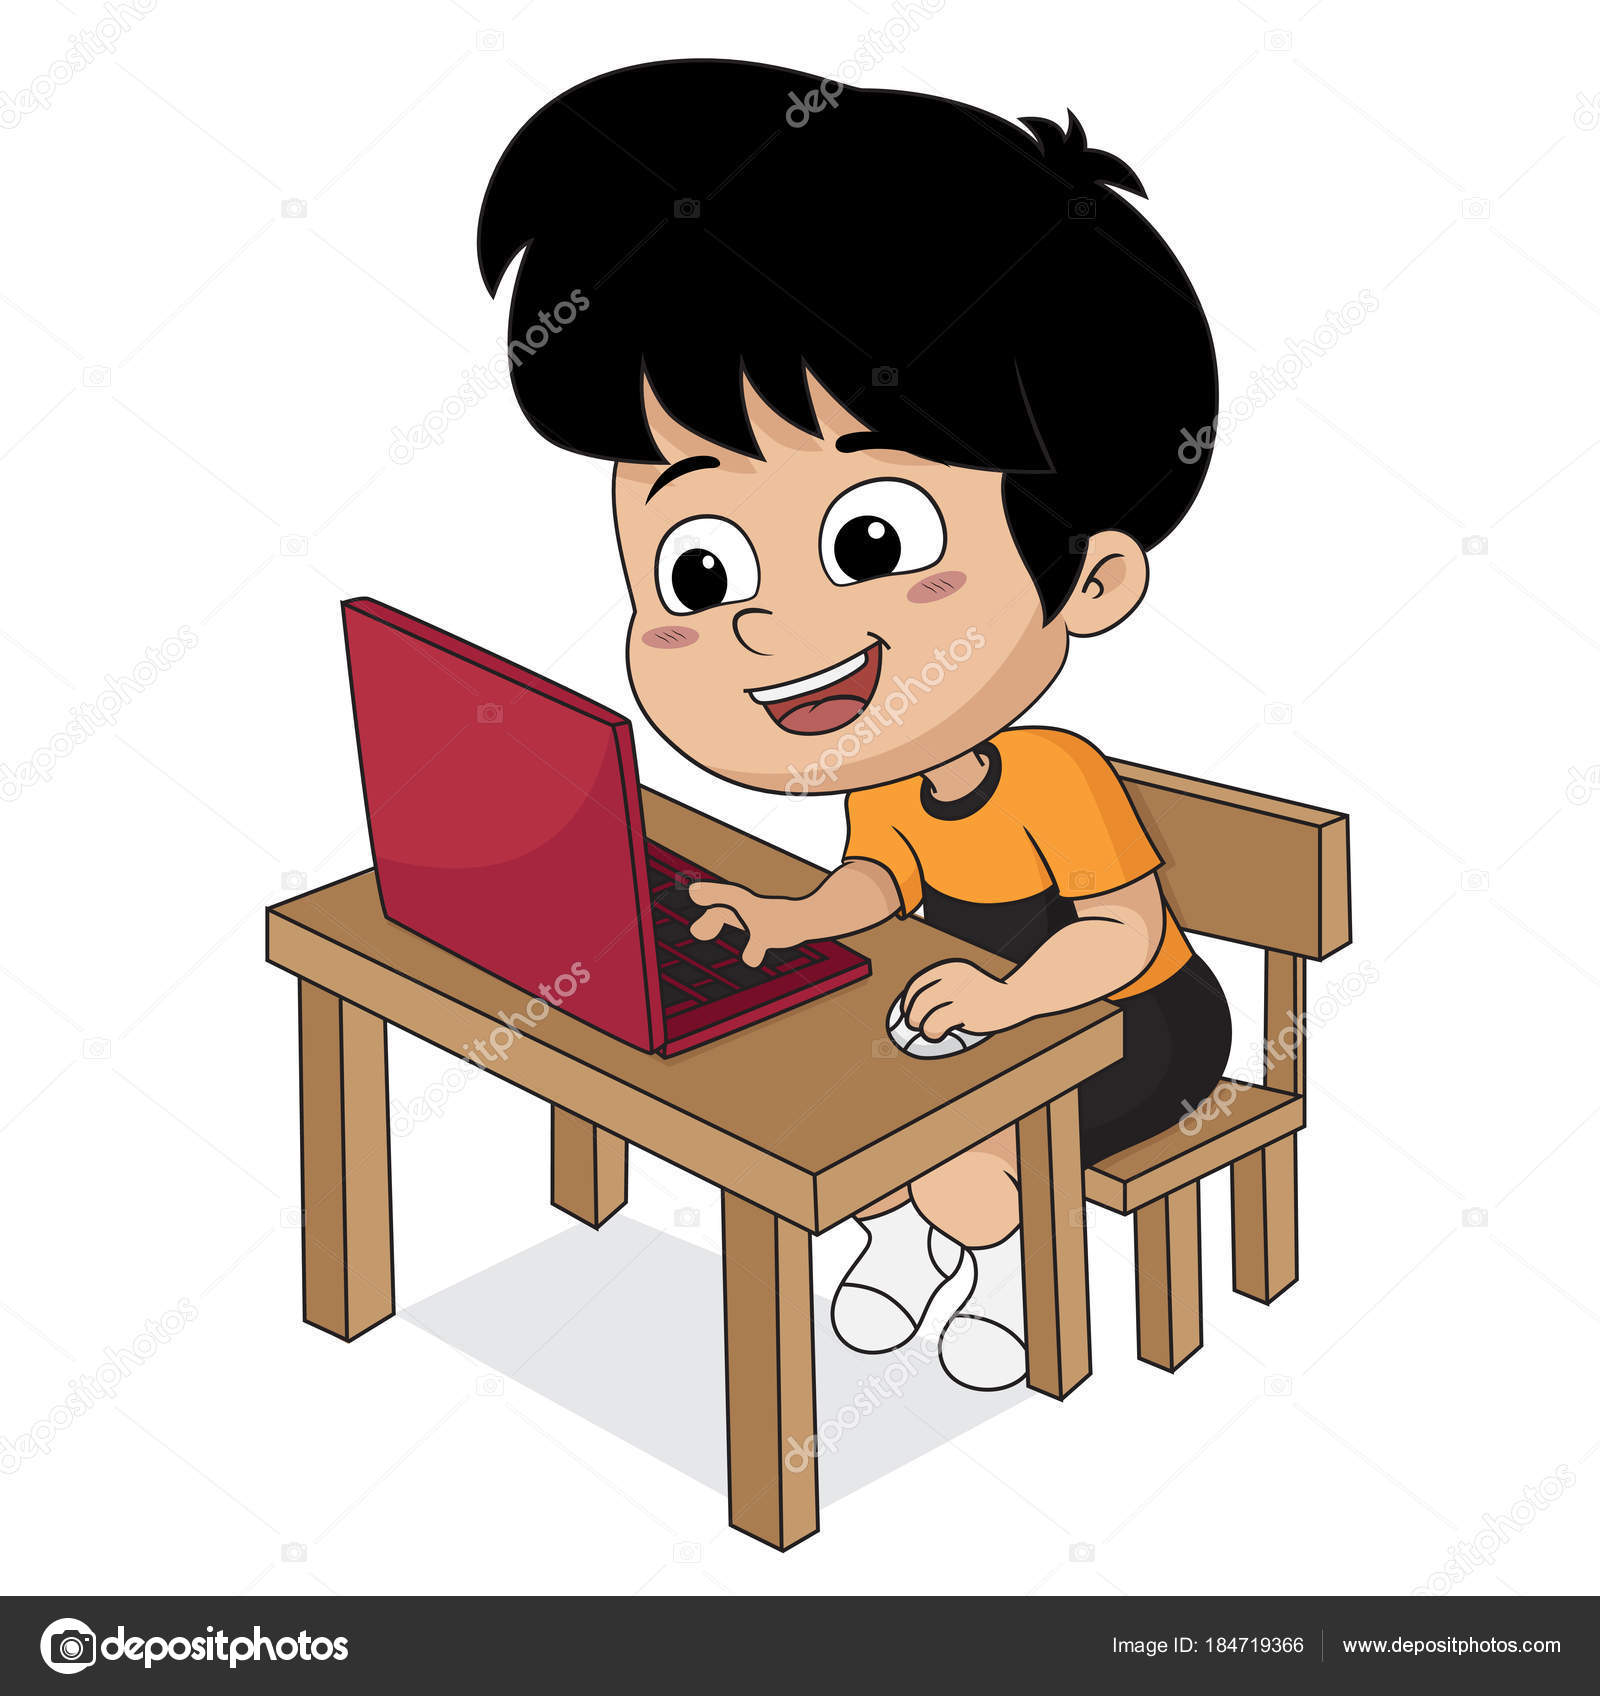 Child Teen Playing Online Video Games on Computer Stock Vector -  Illustration of student, internet: 226799176